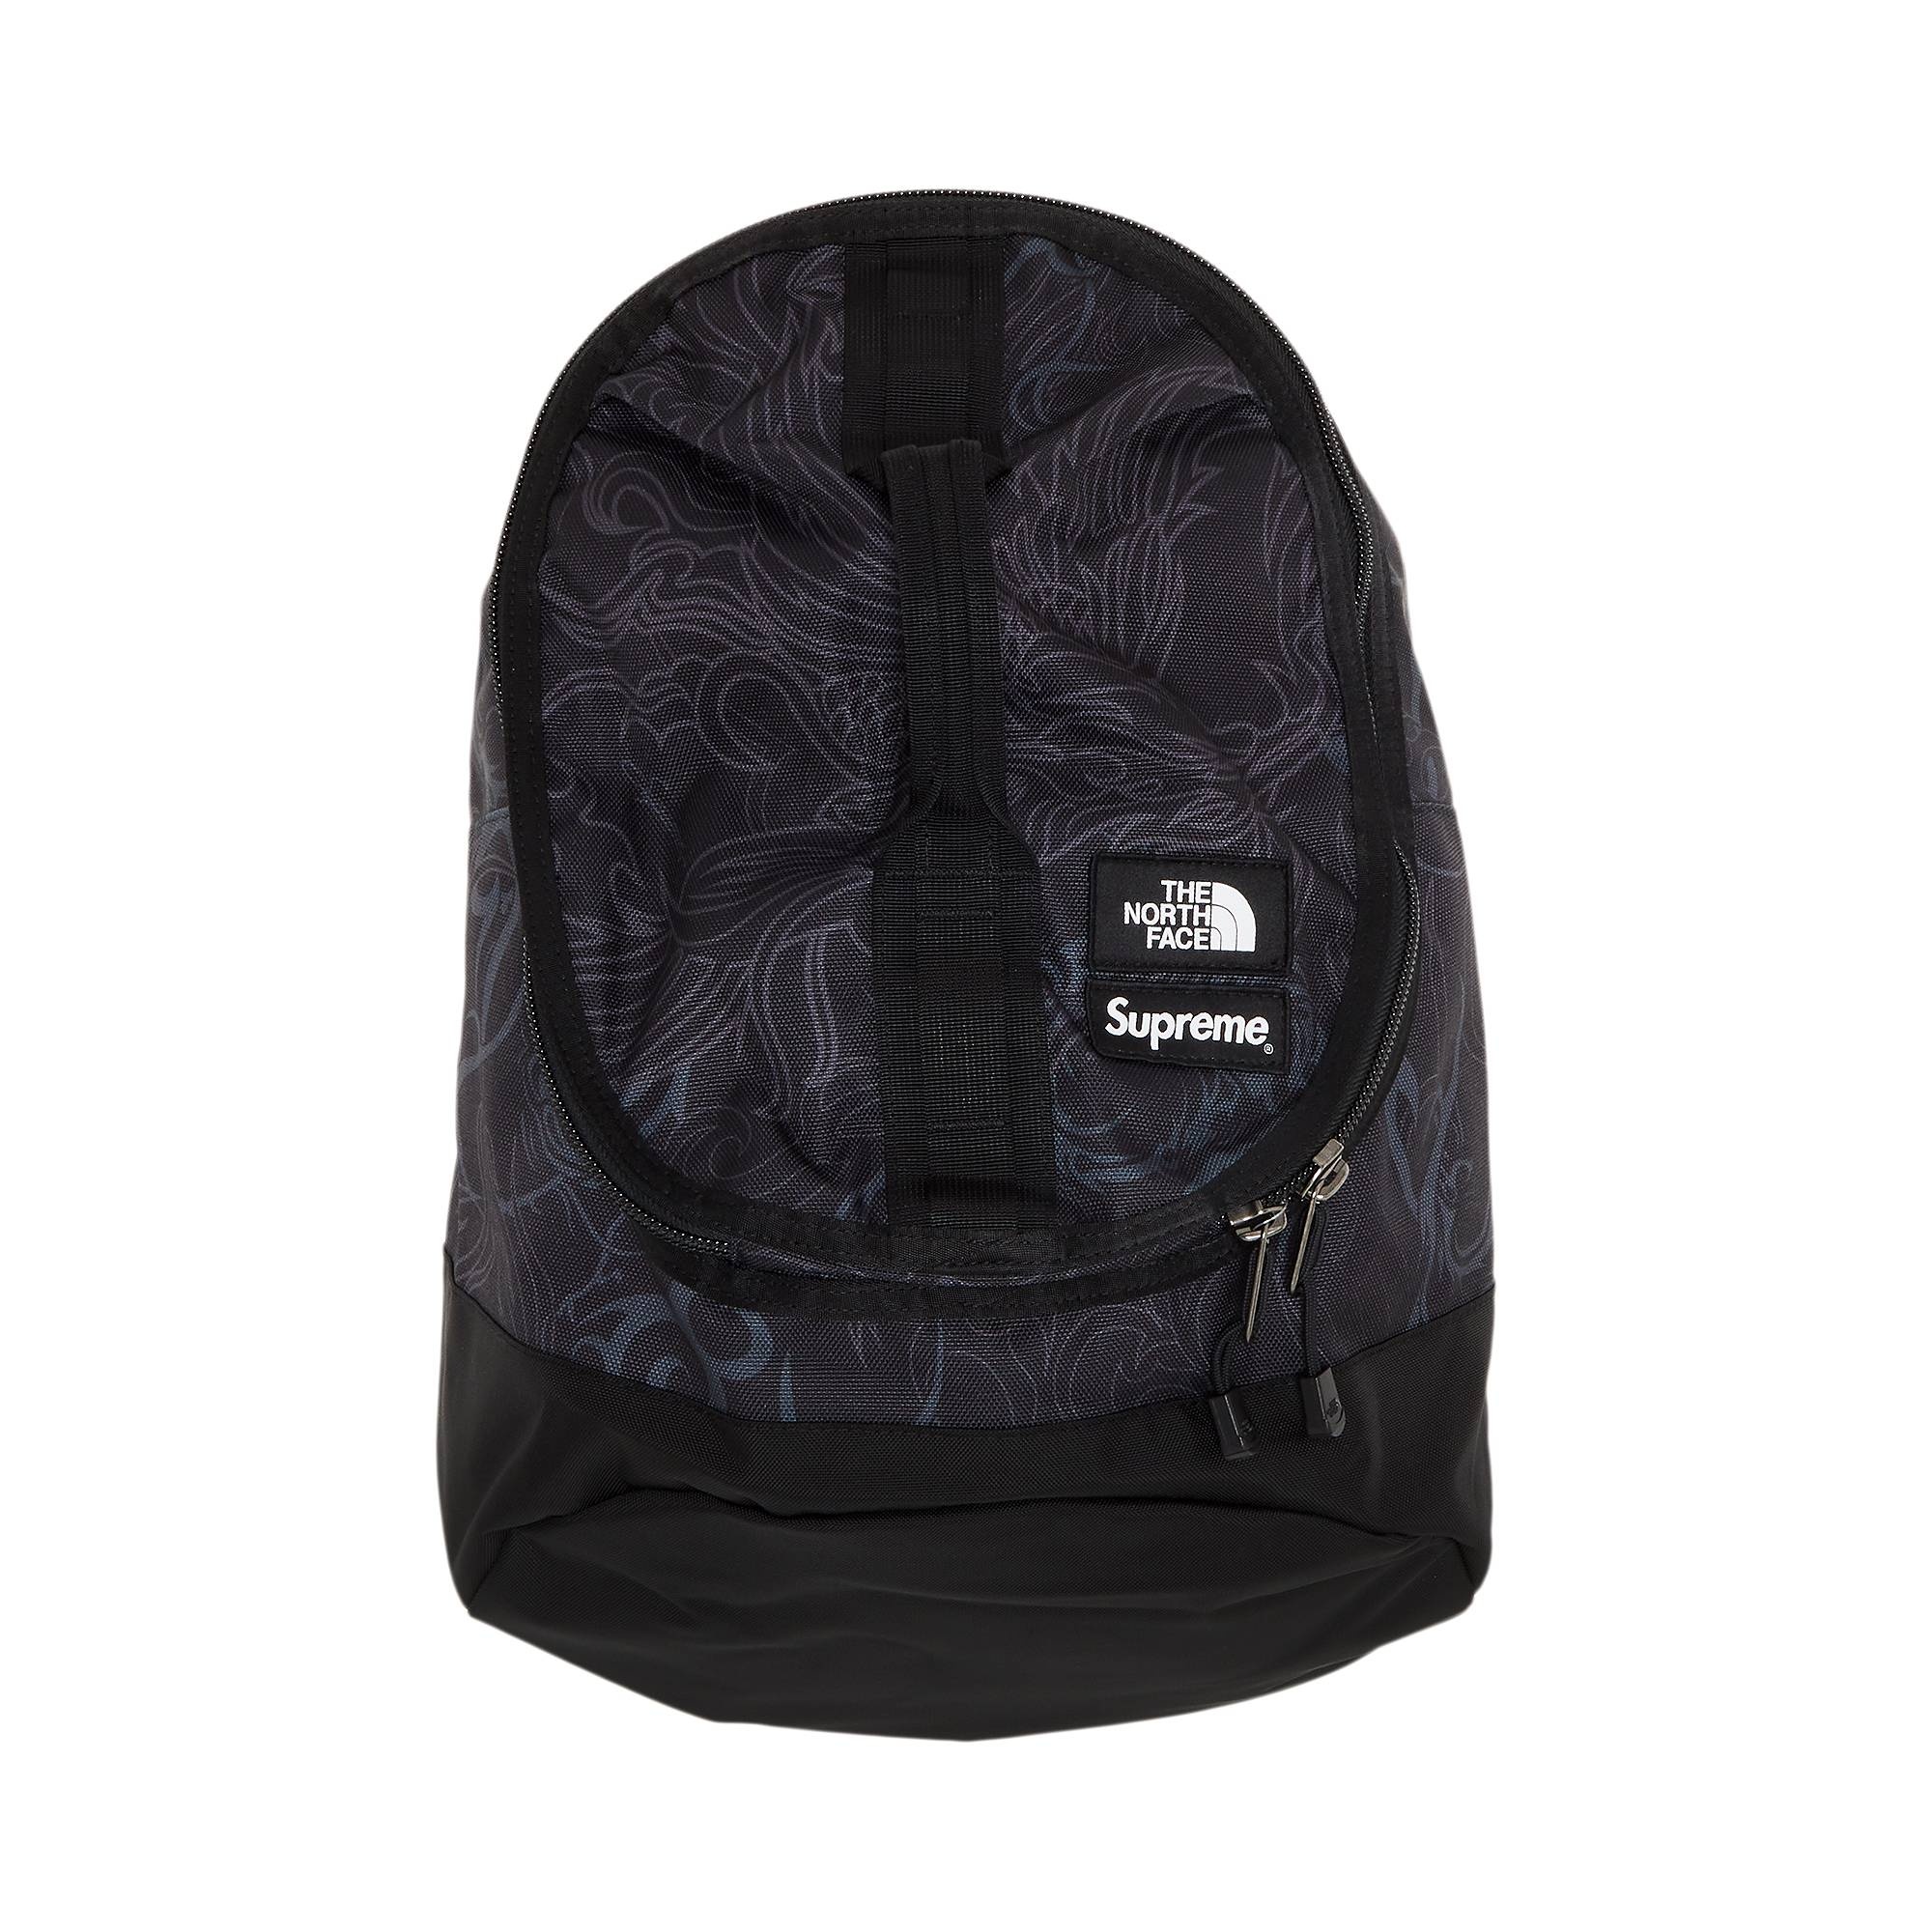 Supreme x The North Face Steep Tech Backpack 'Black Dragon' - 1